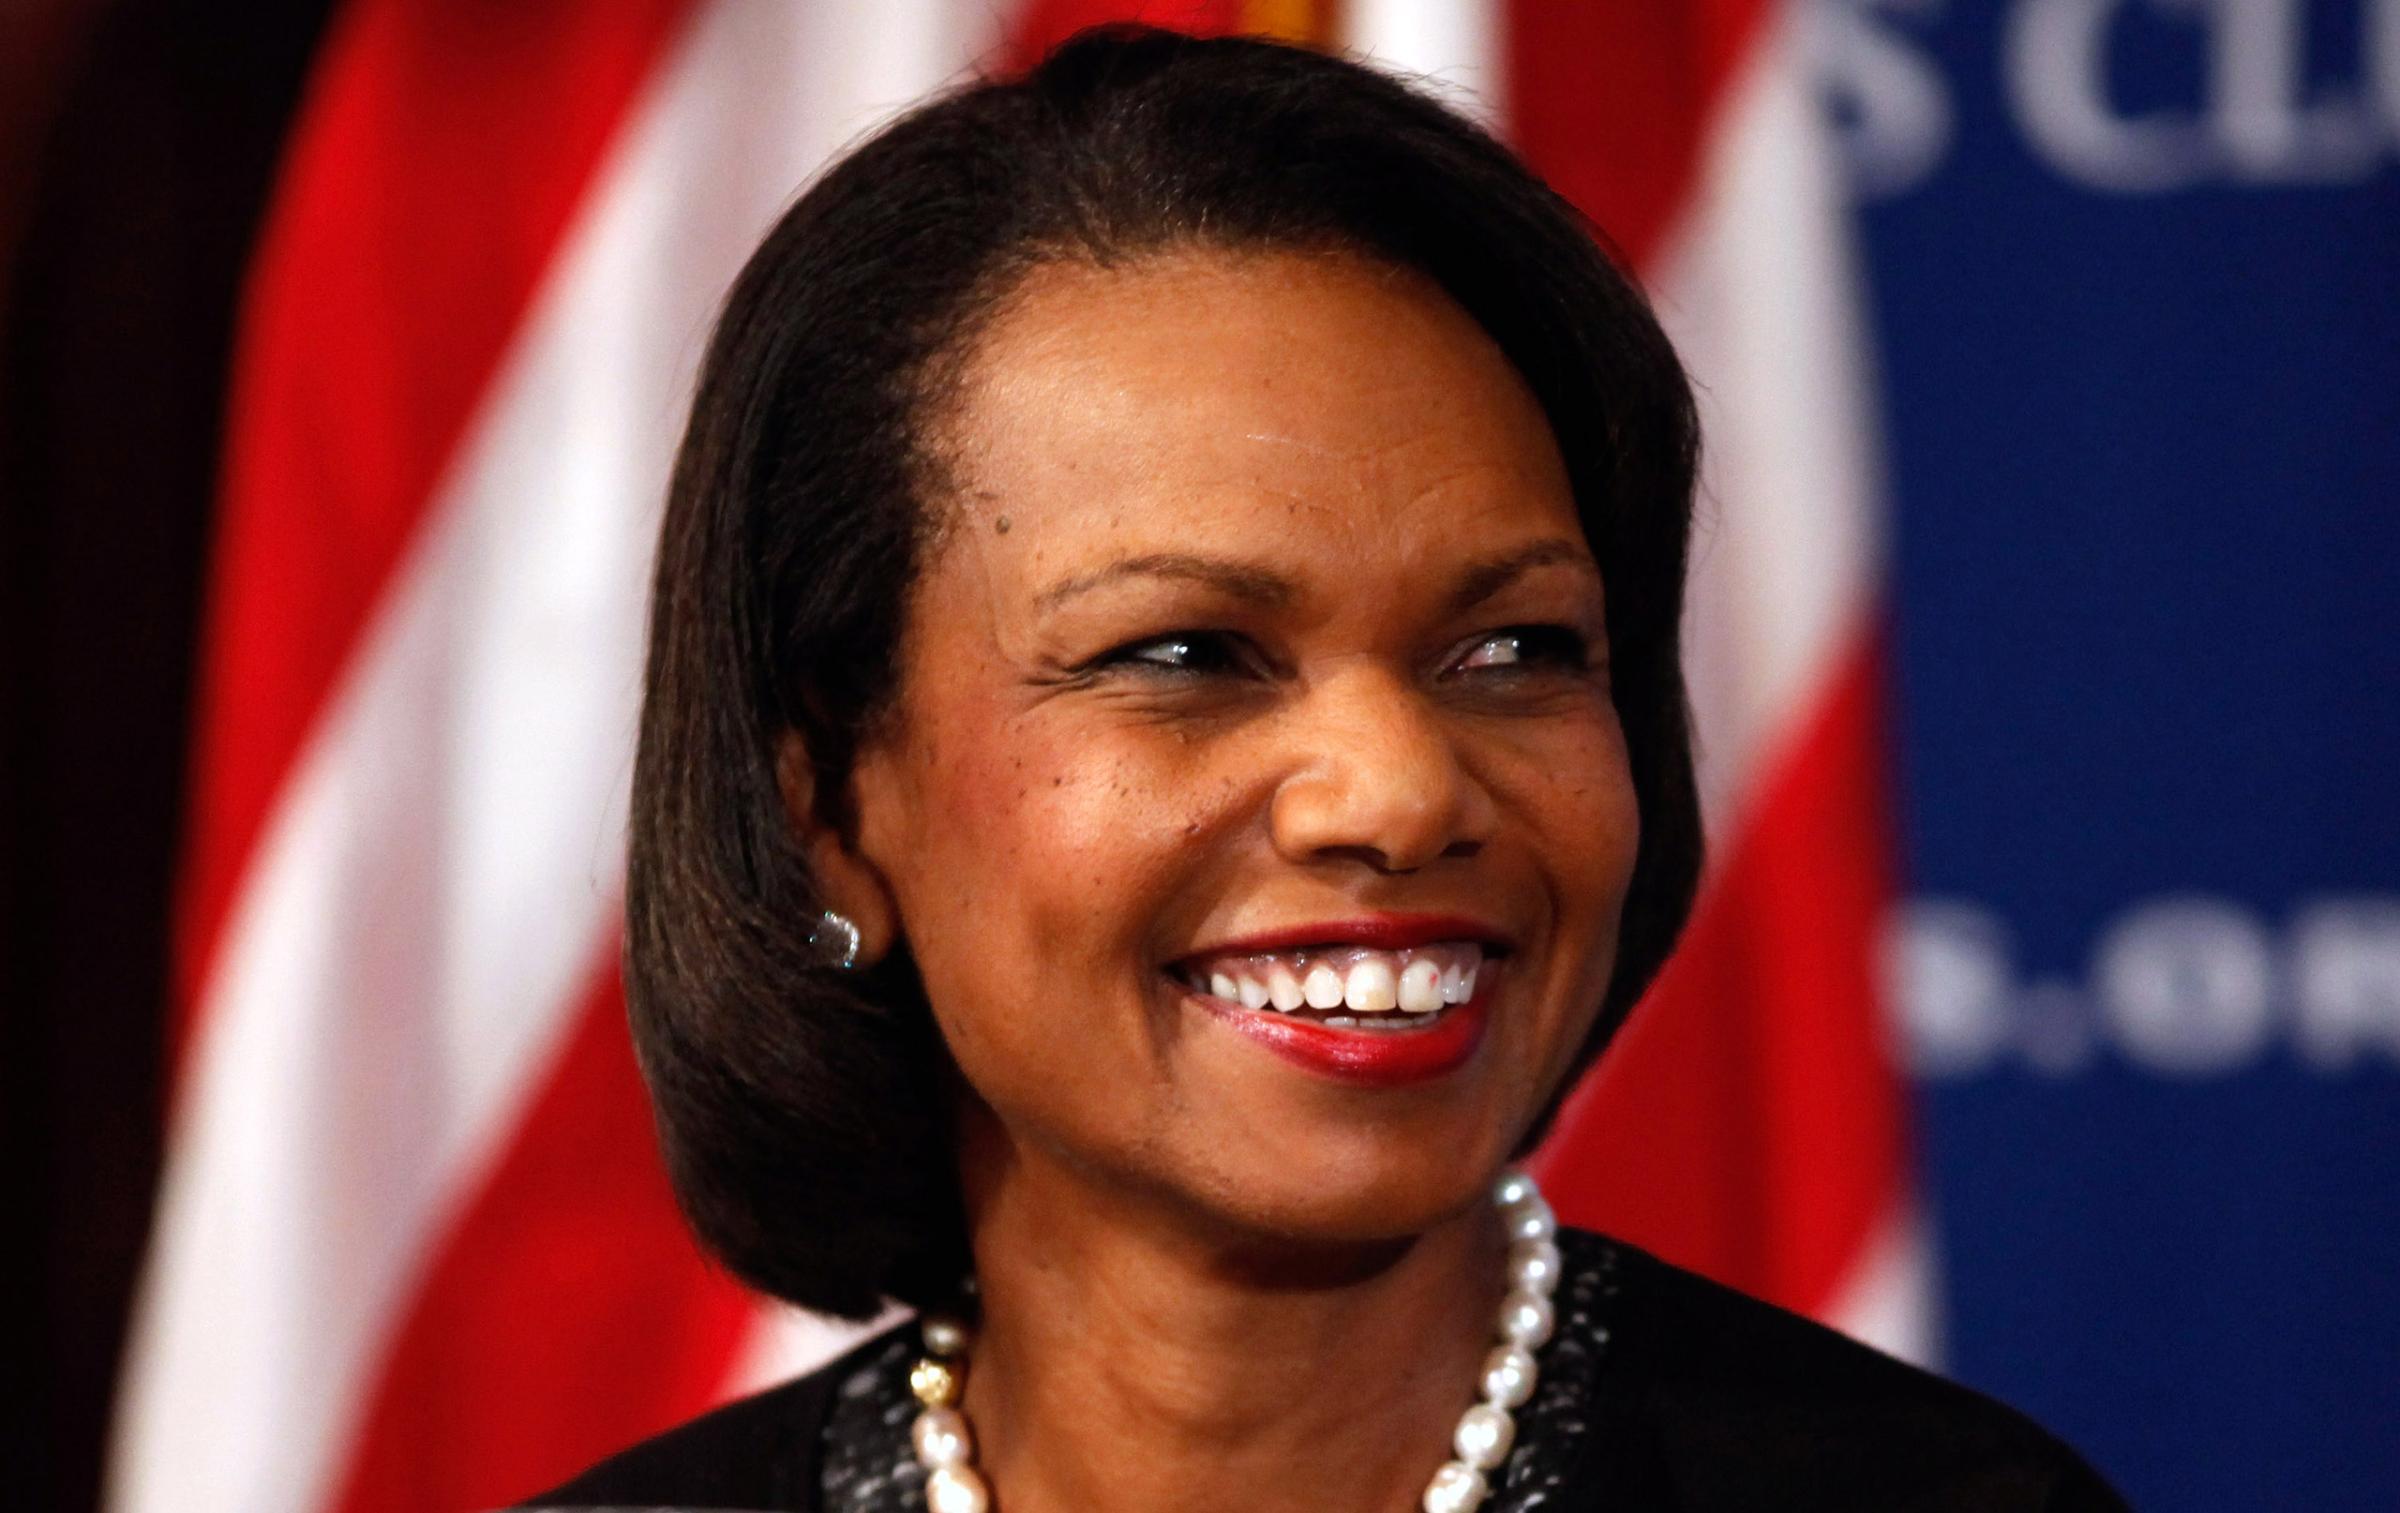 Condoleezza Rice talks about her new book, "Extraordinary, Ordinary People: A Memoir of Family," during the Newsmakers luncheon at the National Press Club October 15, 2010 in Washington, DC.